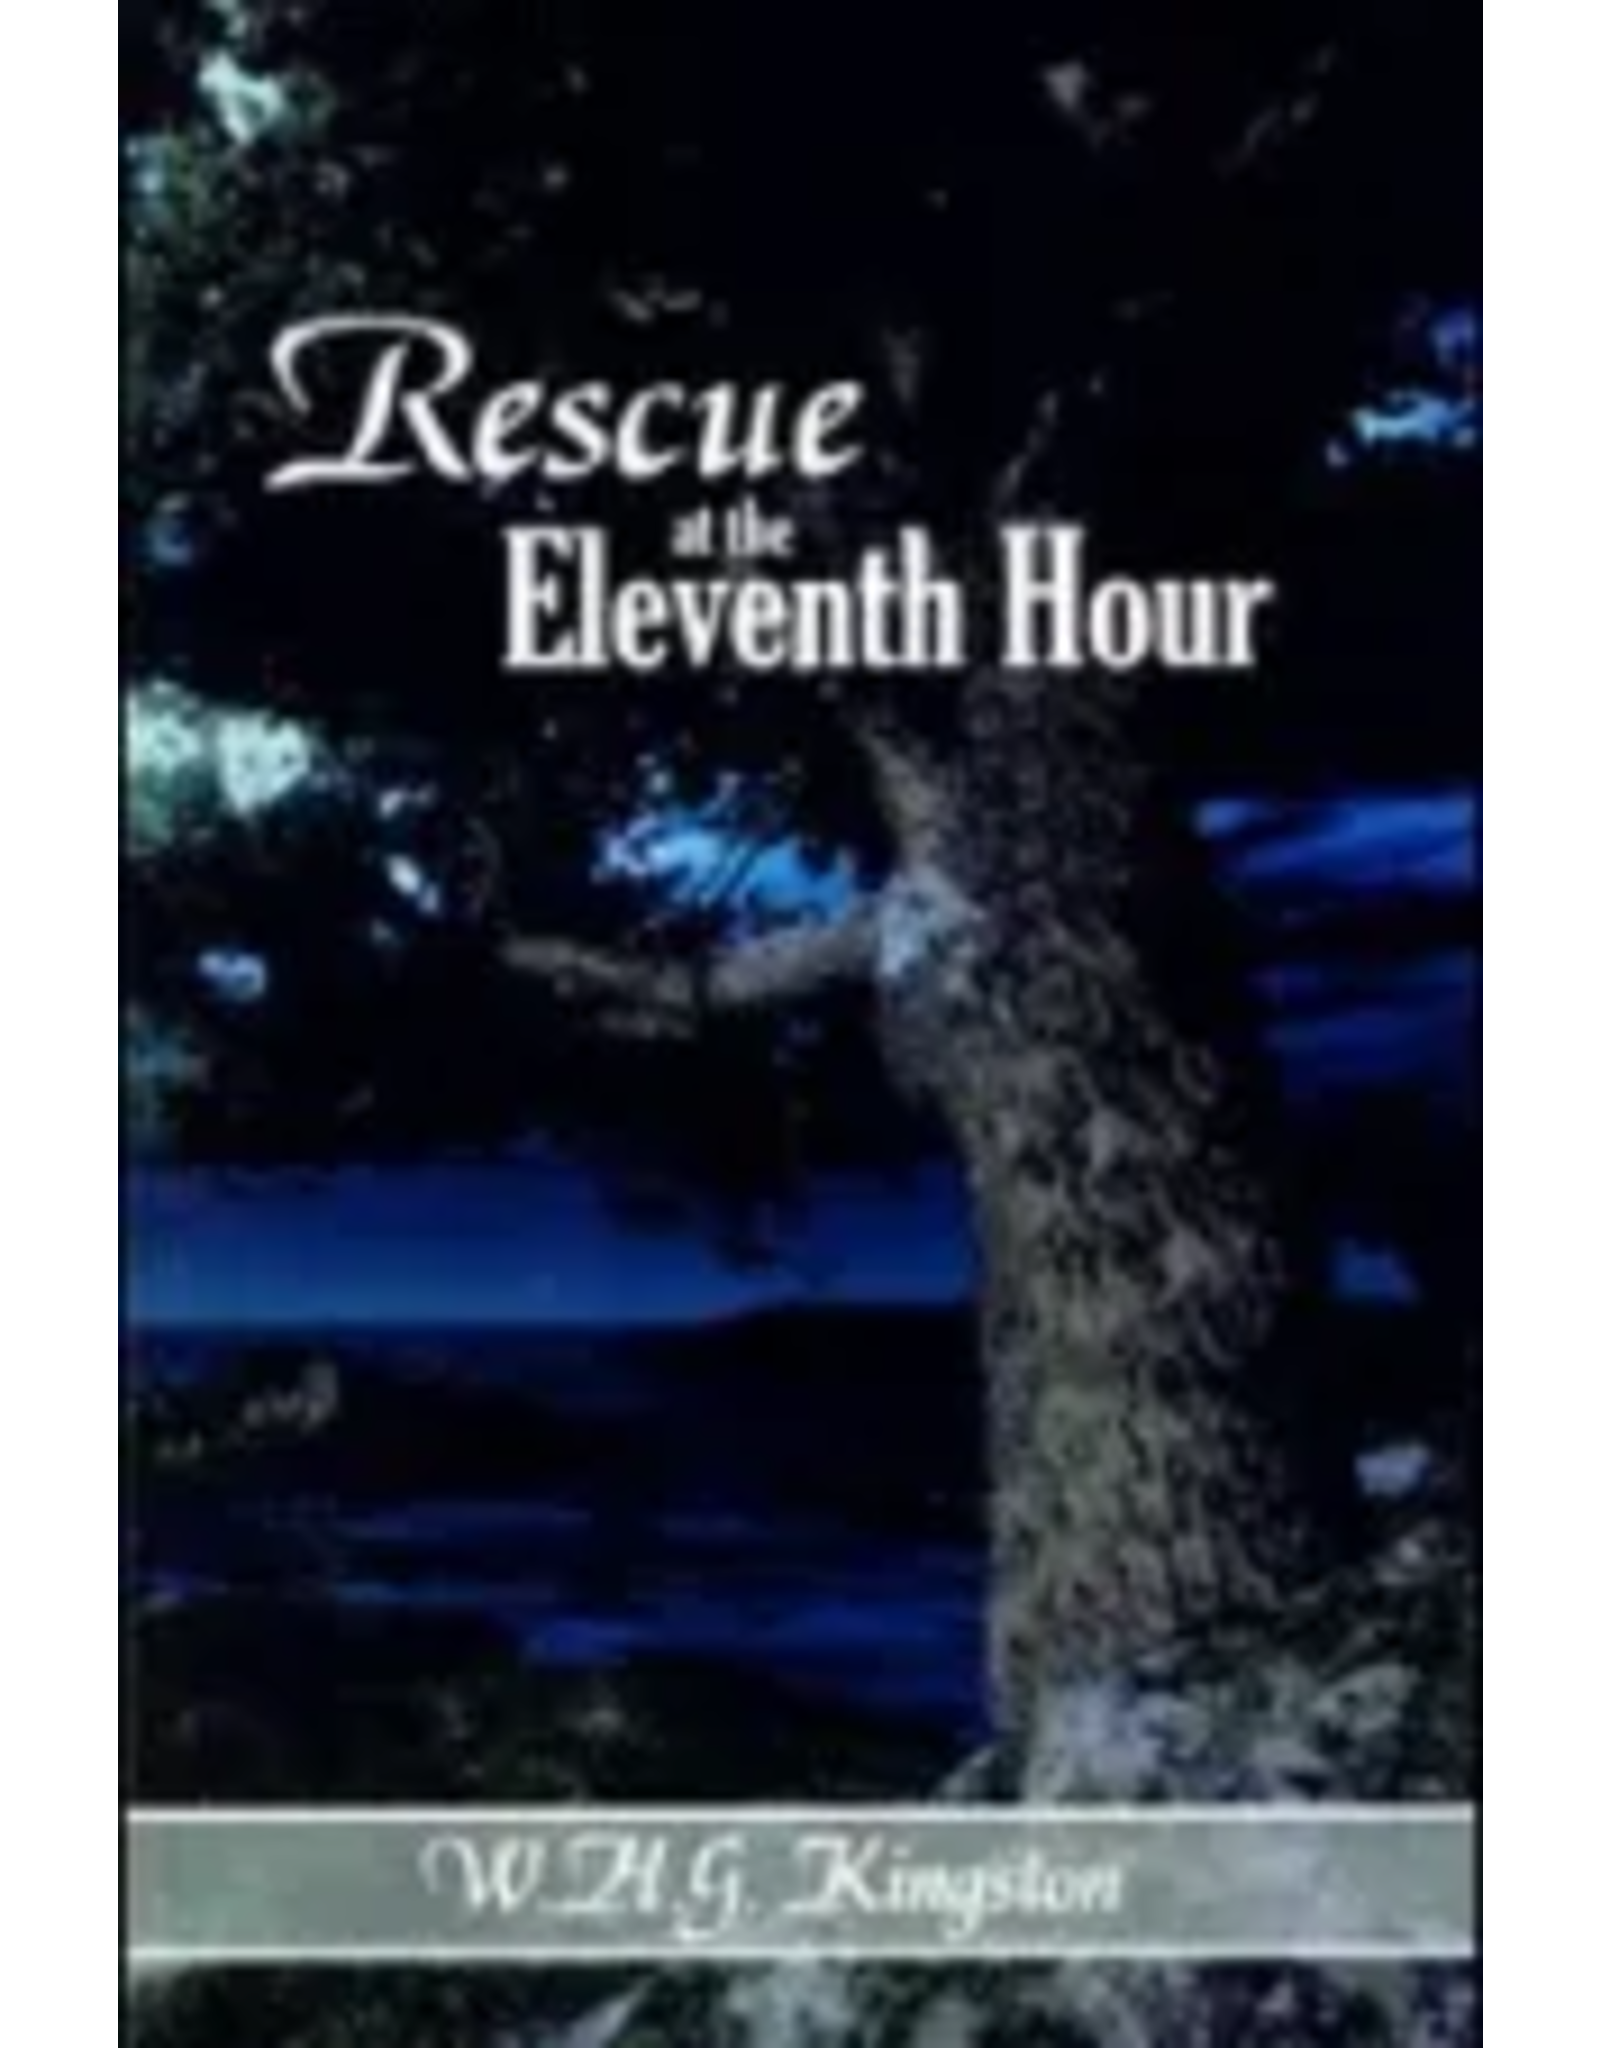 W.H.G. Kingston Rescue at the Eleventh Hour